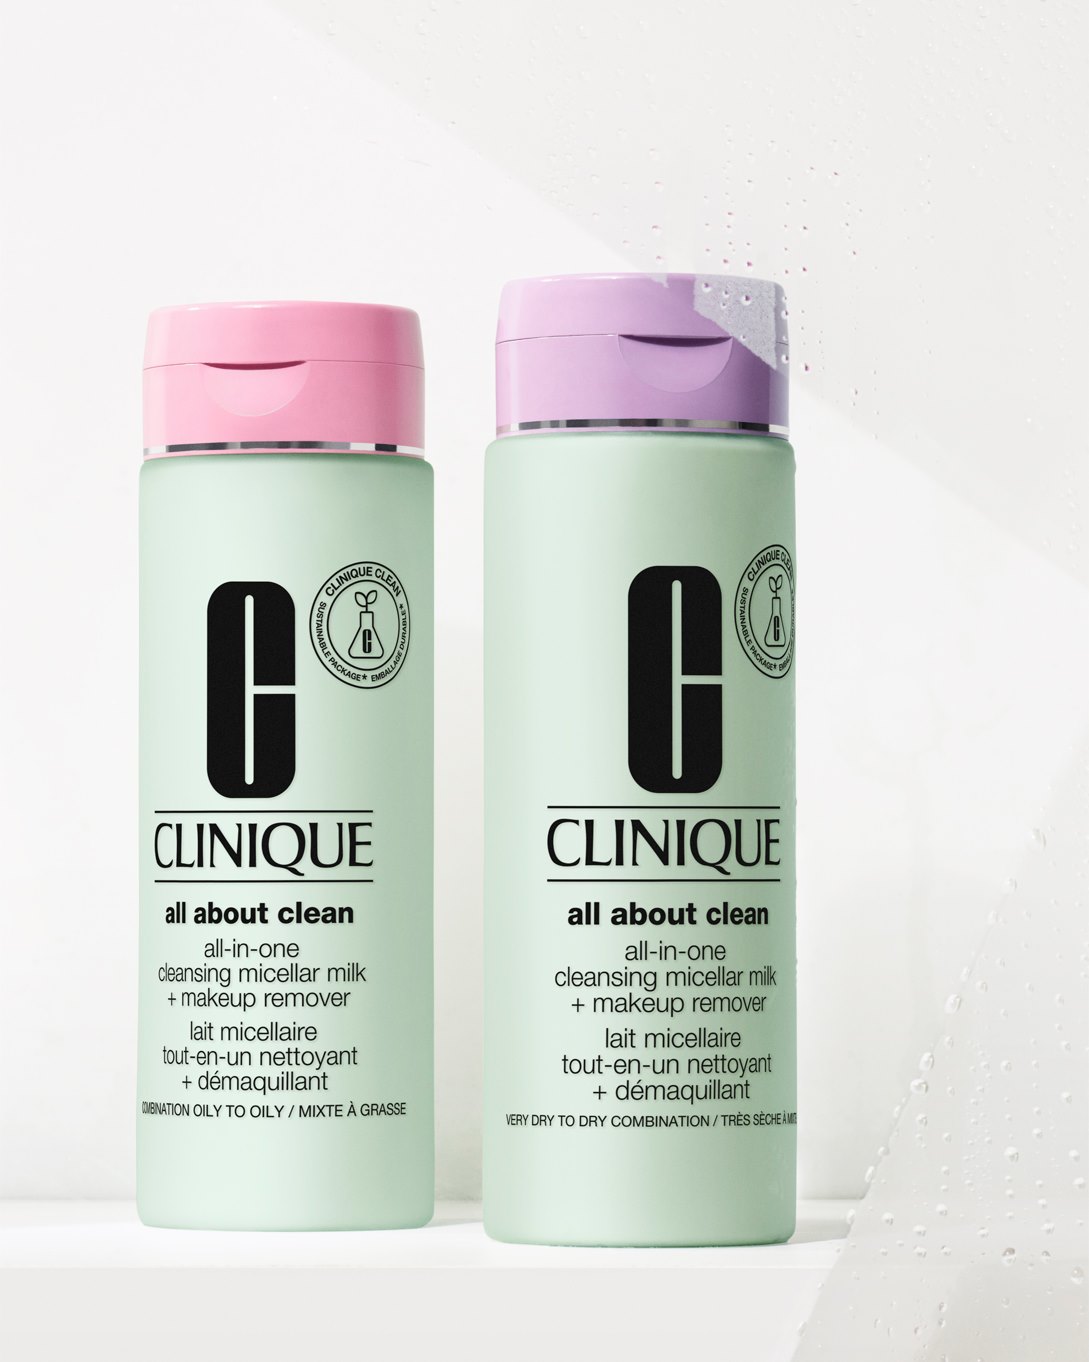 CLINIQUE,All About Clean All-In-One Cleansing Micellar Milk + Makeup Remover ,All About Clean All-In-One Cleansing Micellar Milk + Makeup Remover (Skin Types 3 & 4) 200 ml ,เคลนเซอร์,เคลนเซอร์ น้ำนม,